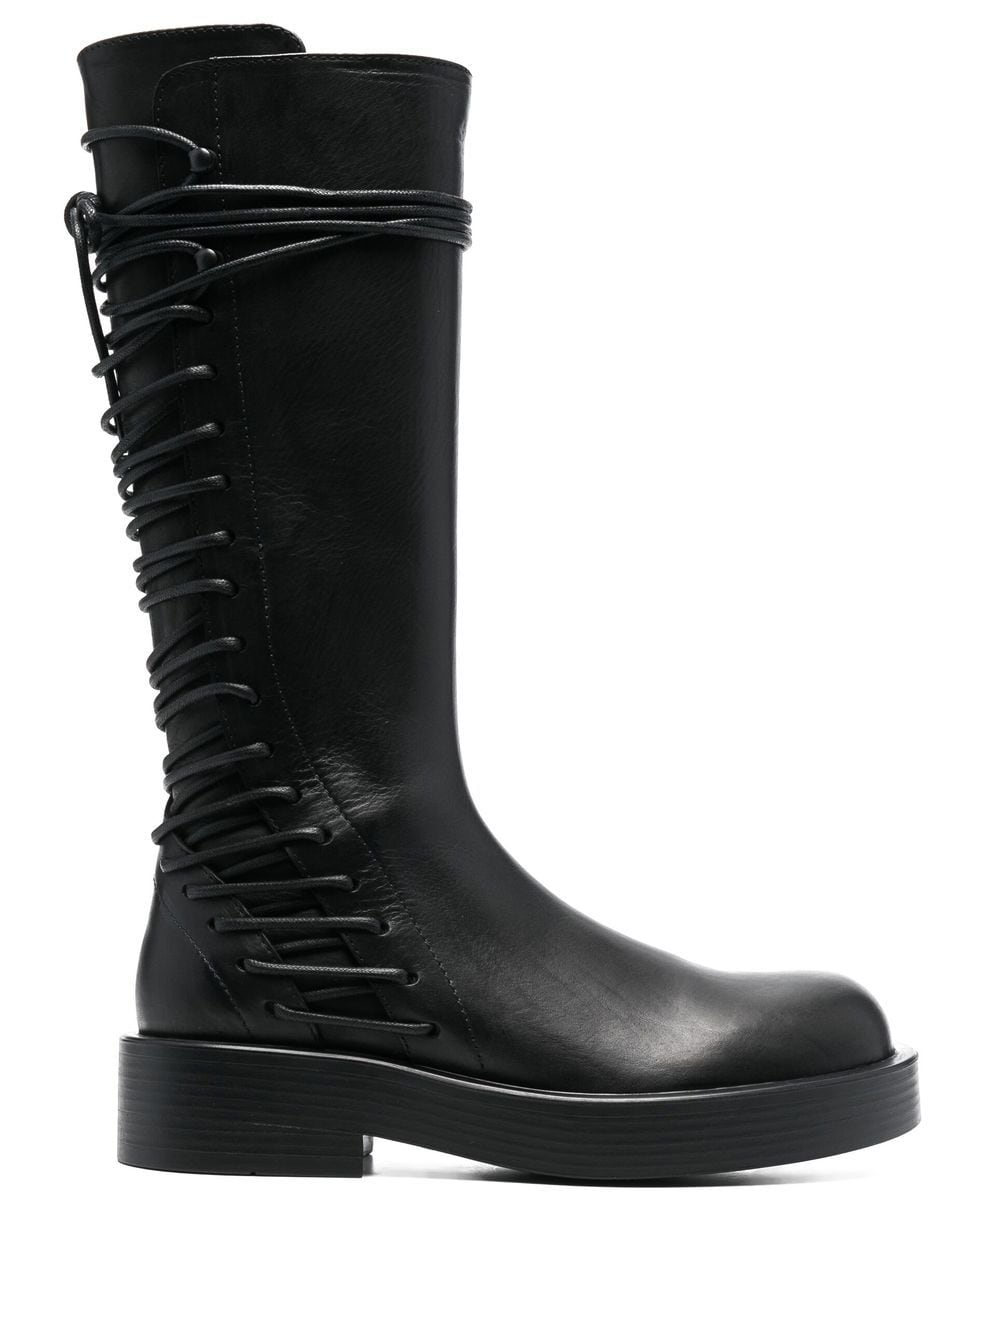 Ann Demeulemeester lace-up leather knee-high boots - Black von Ann Demeulemeester